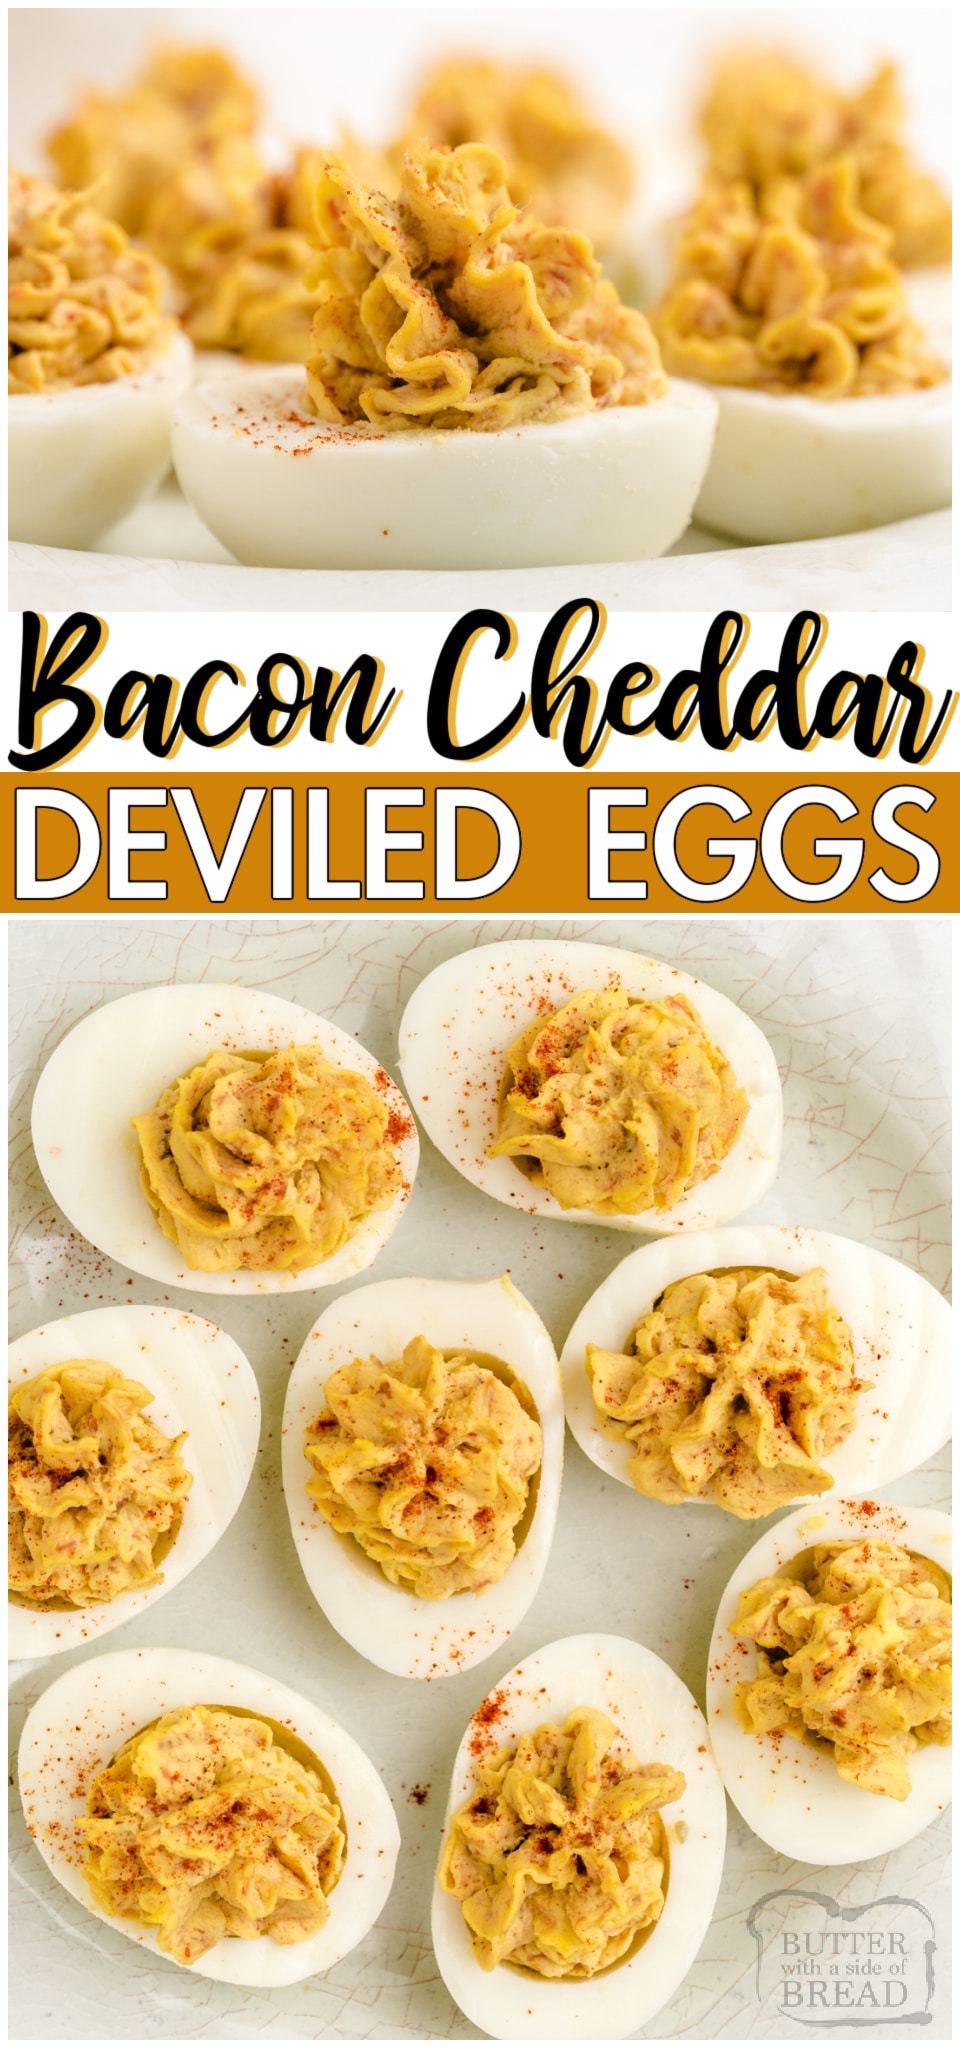 Bacon cheddar deviled eggs is a delicious twist on a classic! Traditional Deviled Eggs recipe with the addition of bacon and cheddar cheese for a fantastic savory appetizer. #eggs #appetizer #deviled #bacon #cheddar #cheese #easyrecipe from BUTTER WITH A SIDE OF BREAD